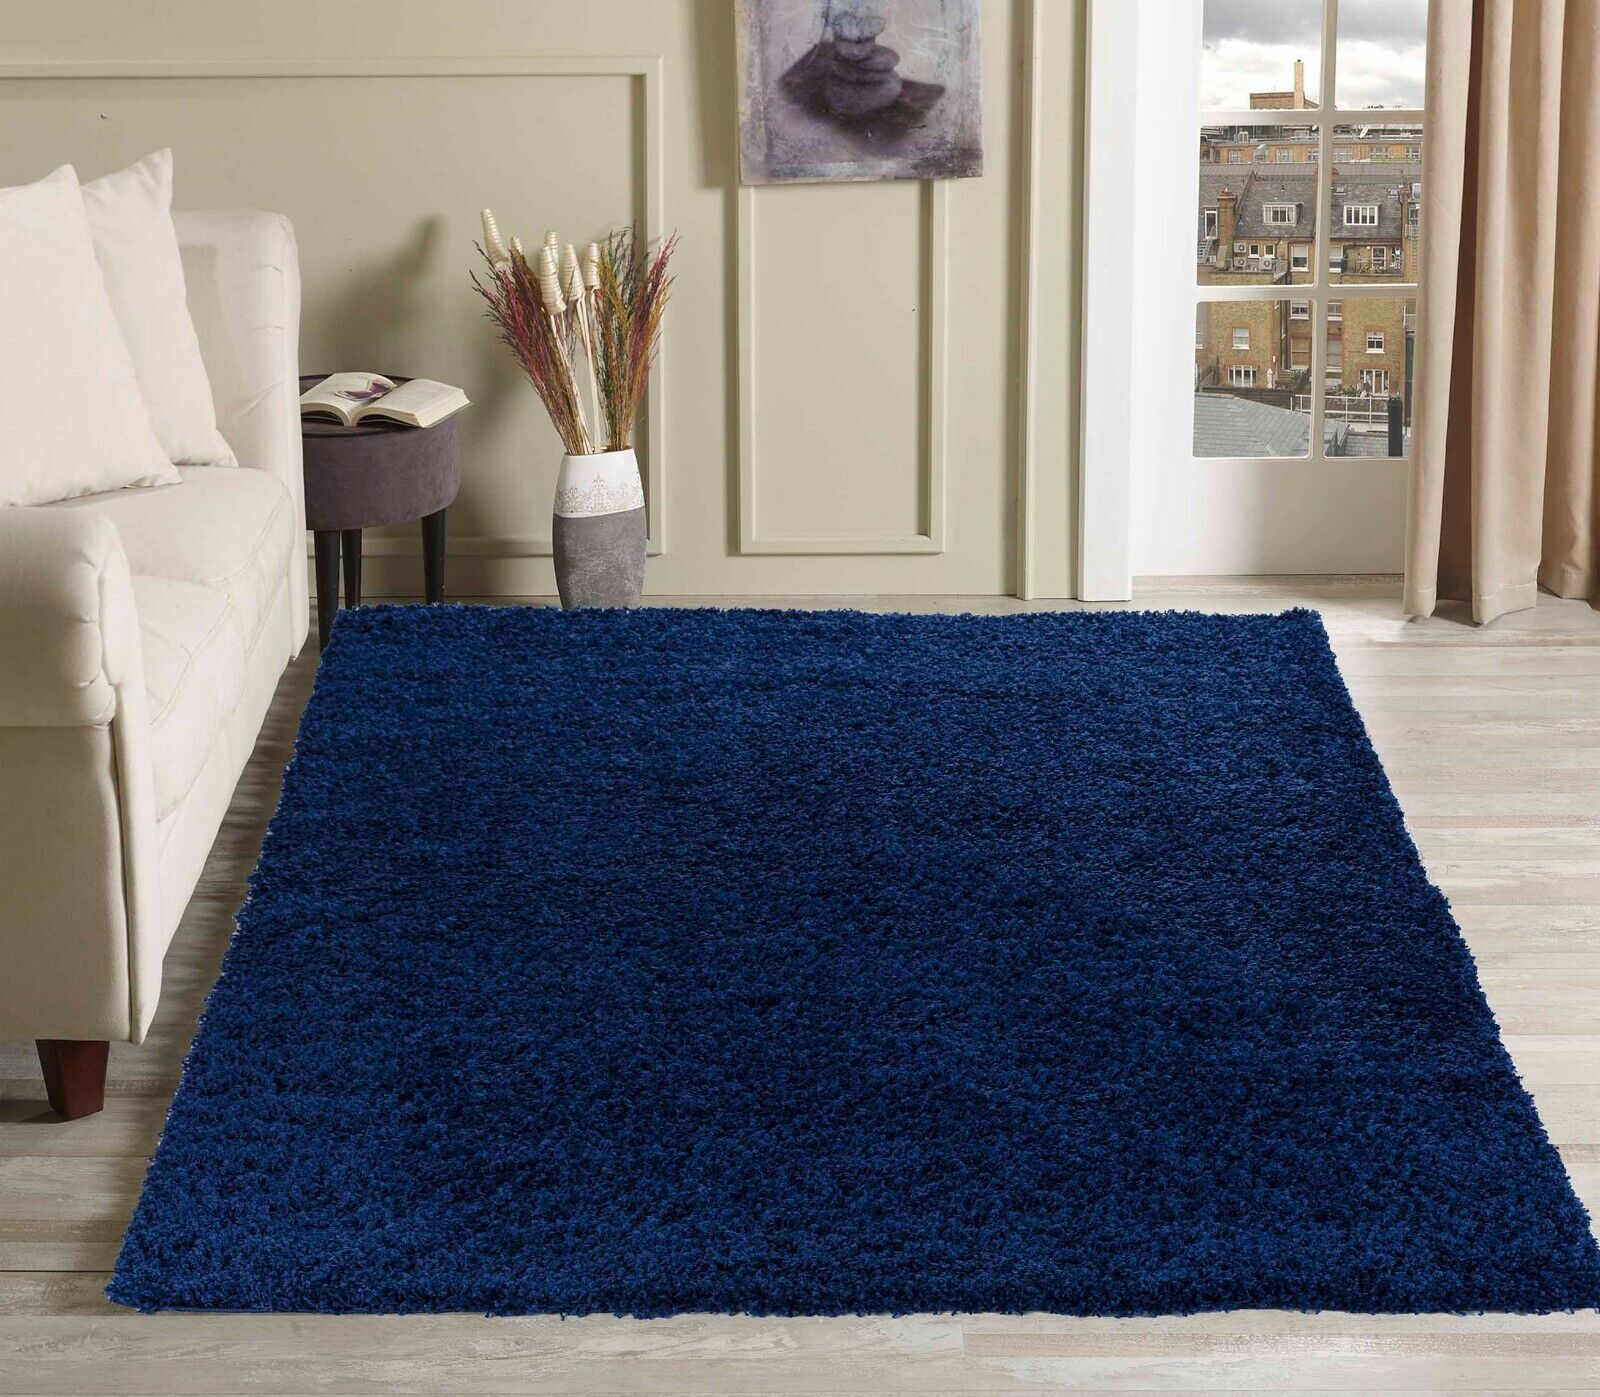 Modern Navy Blue Small – Large Living Room Area Plain Shaggy Rug | Ebay Inside Blue Rugs (View 15 of 15)